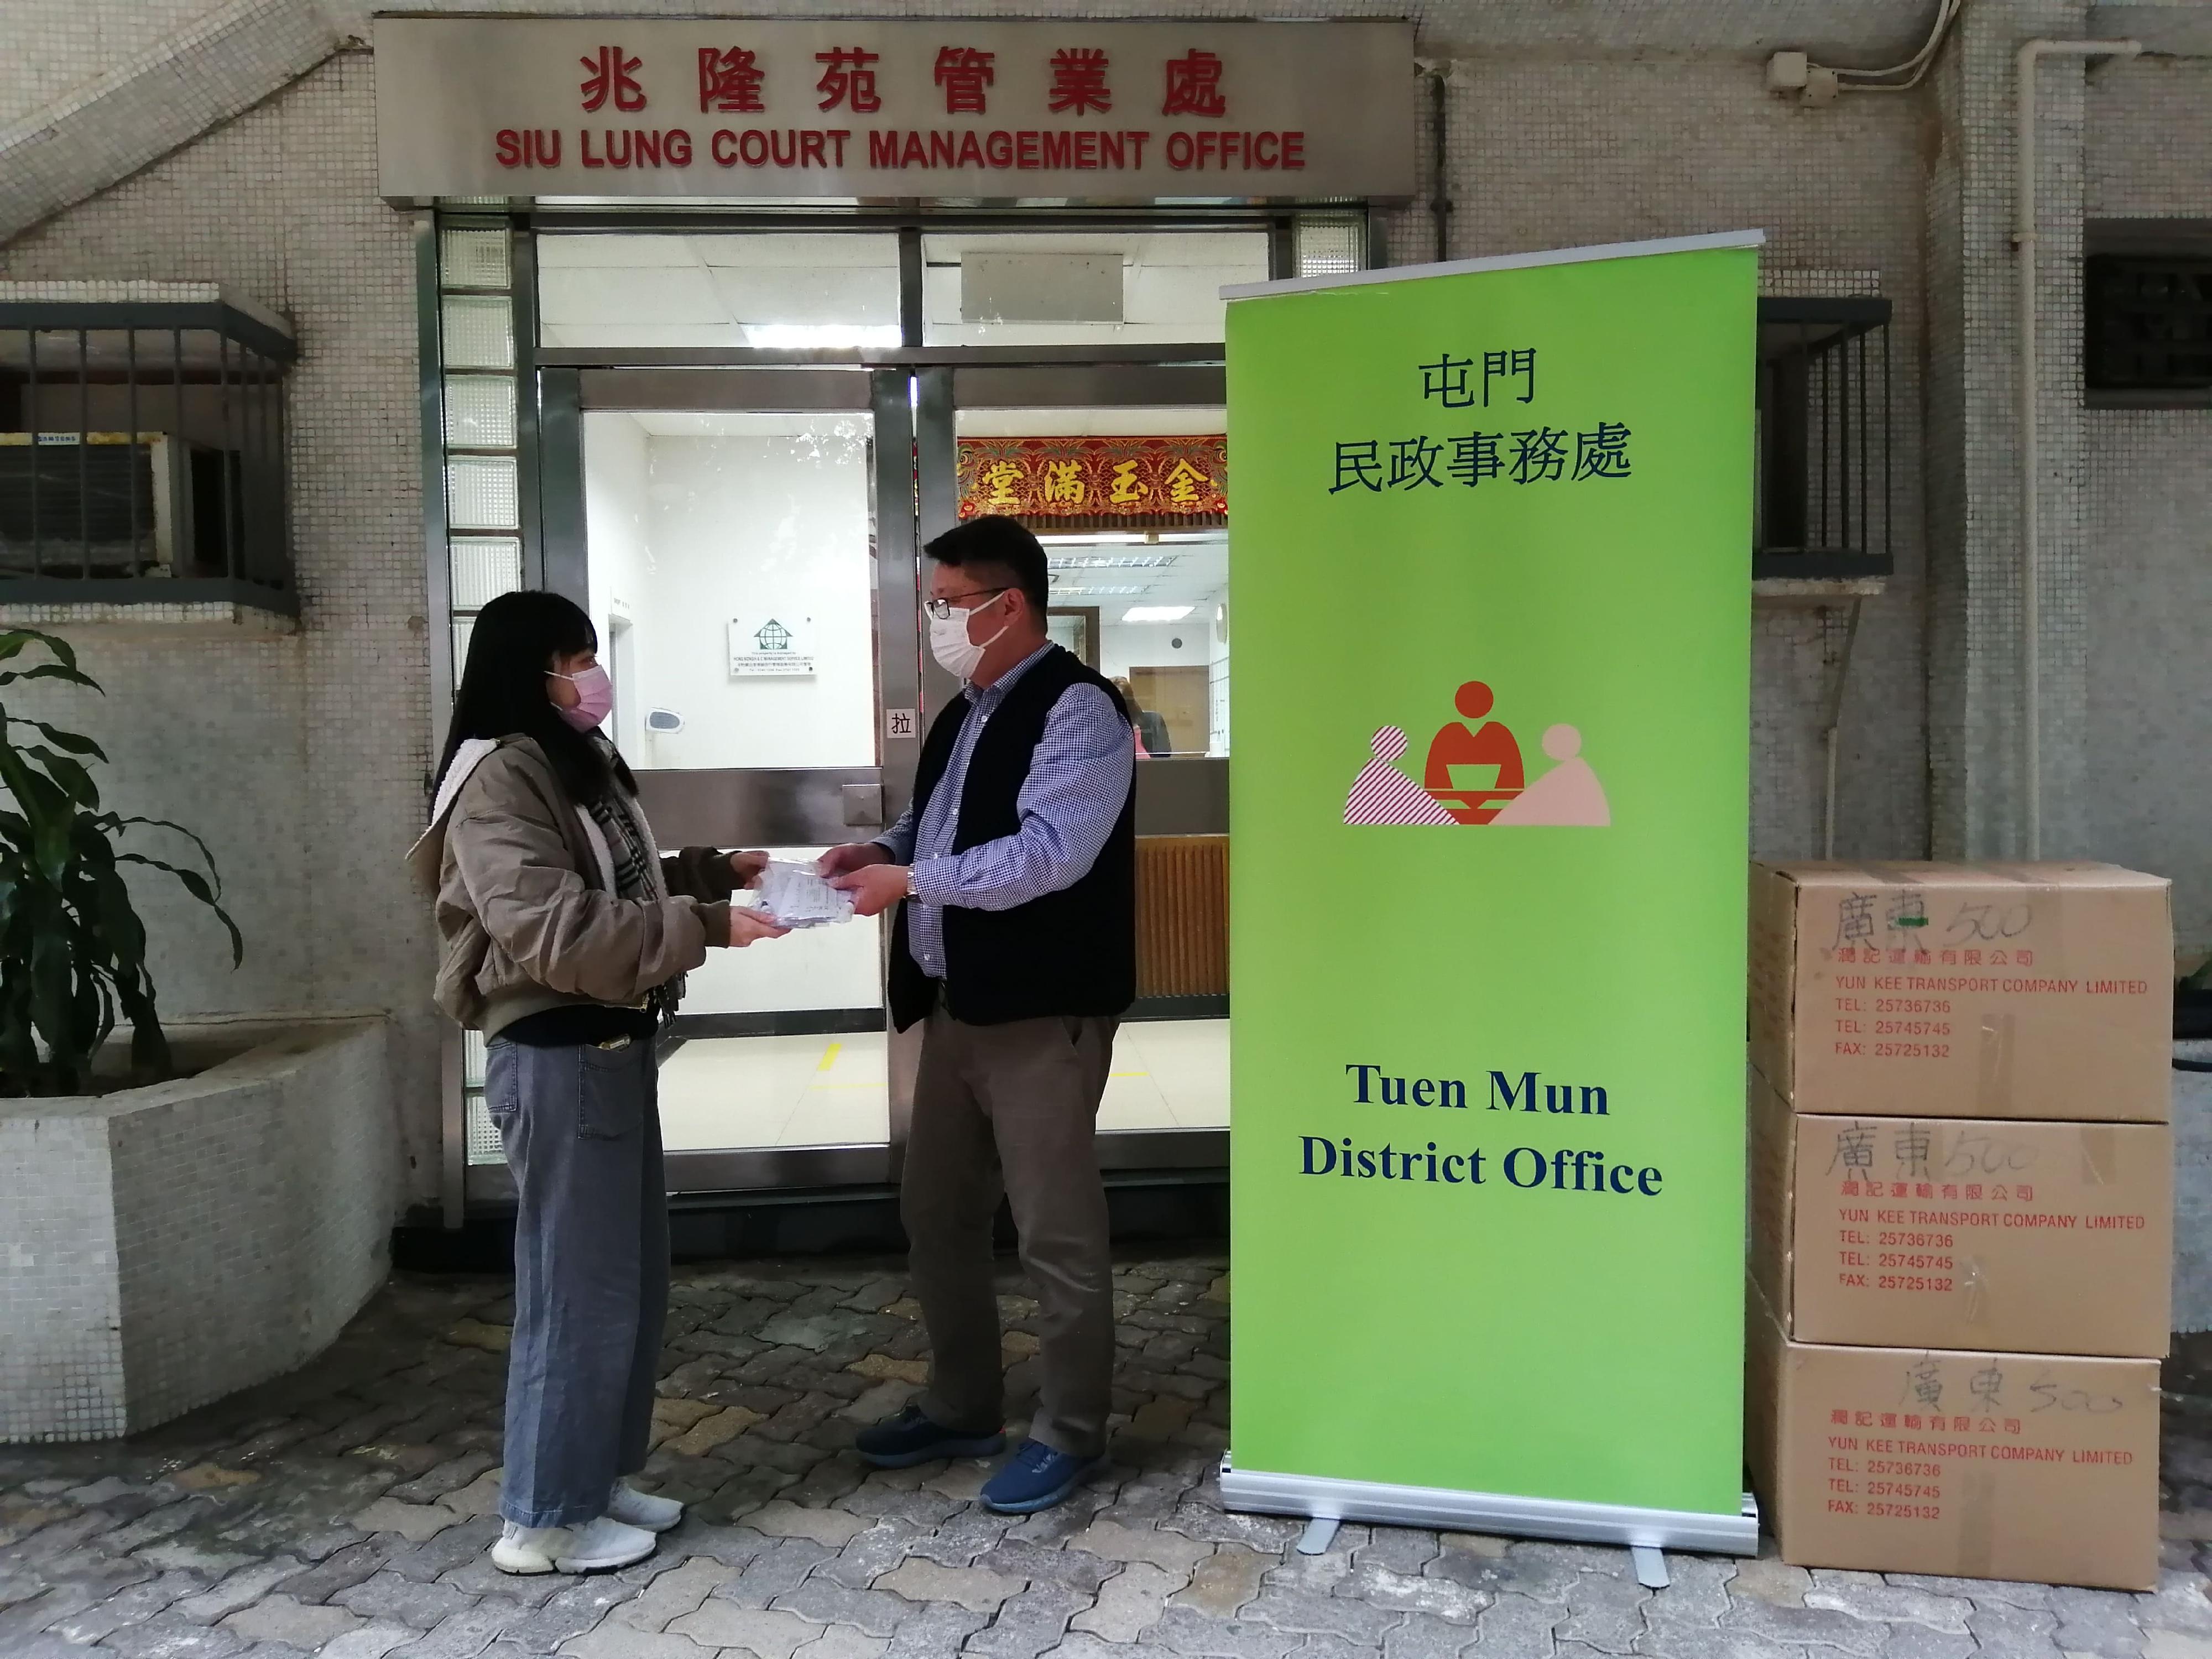 The Tuen Mun District Office today (February 7) distributed COVID-19 rapid test kits to households, cleansing workers and property management staff for voluntary testing through the property management company of Siu Lung Court in Tuen Mun District.